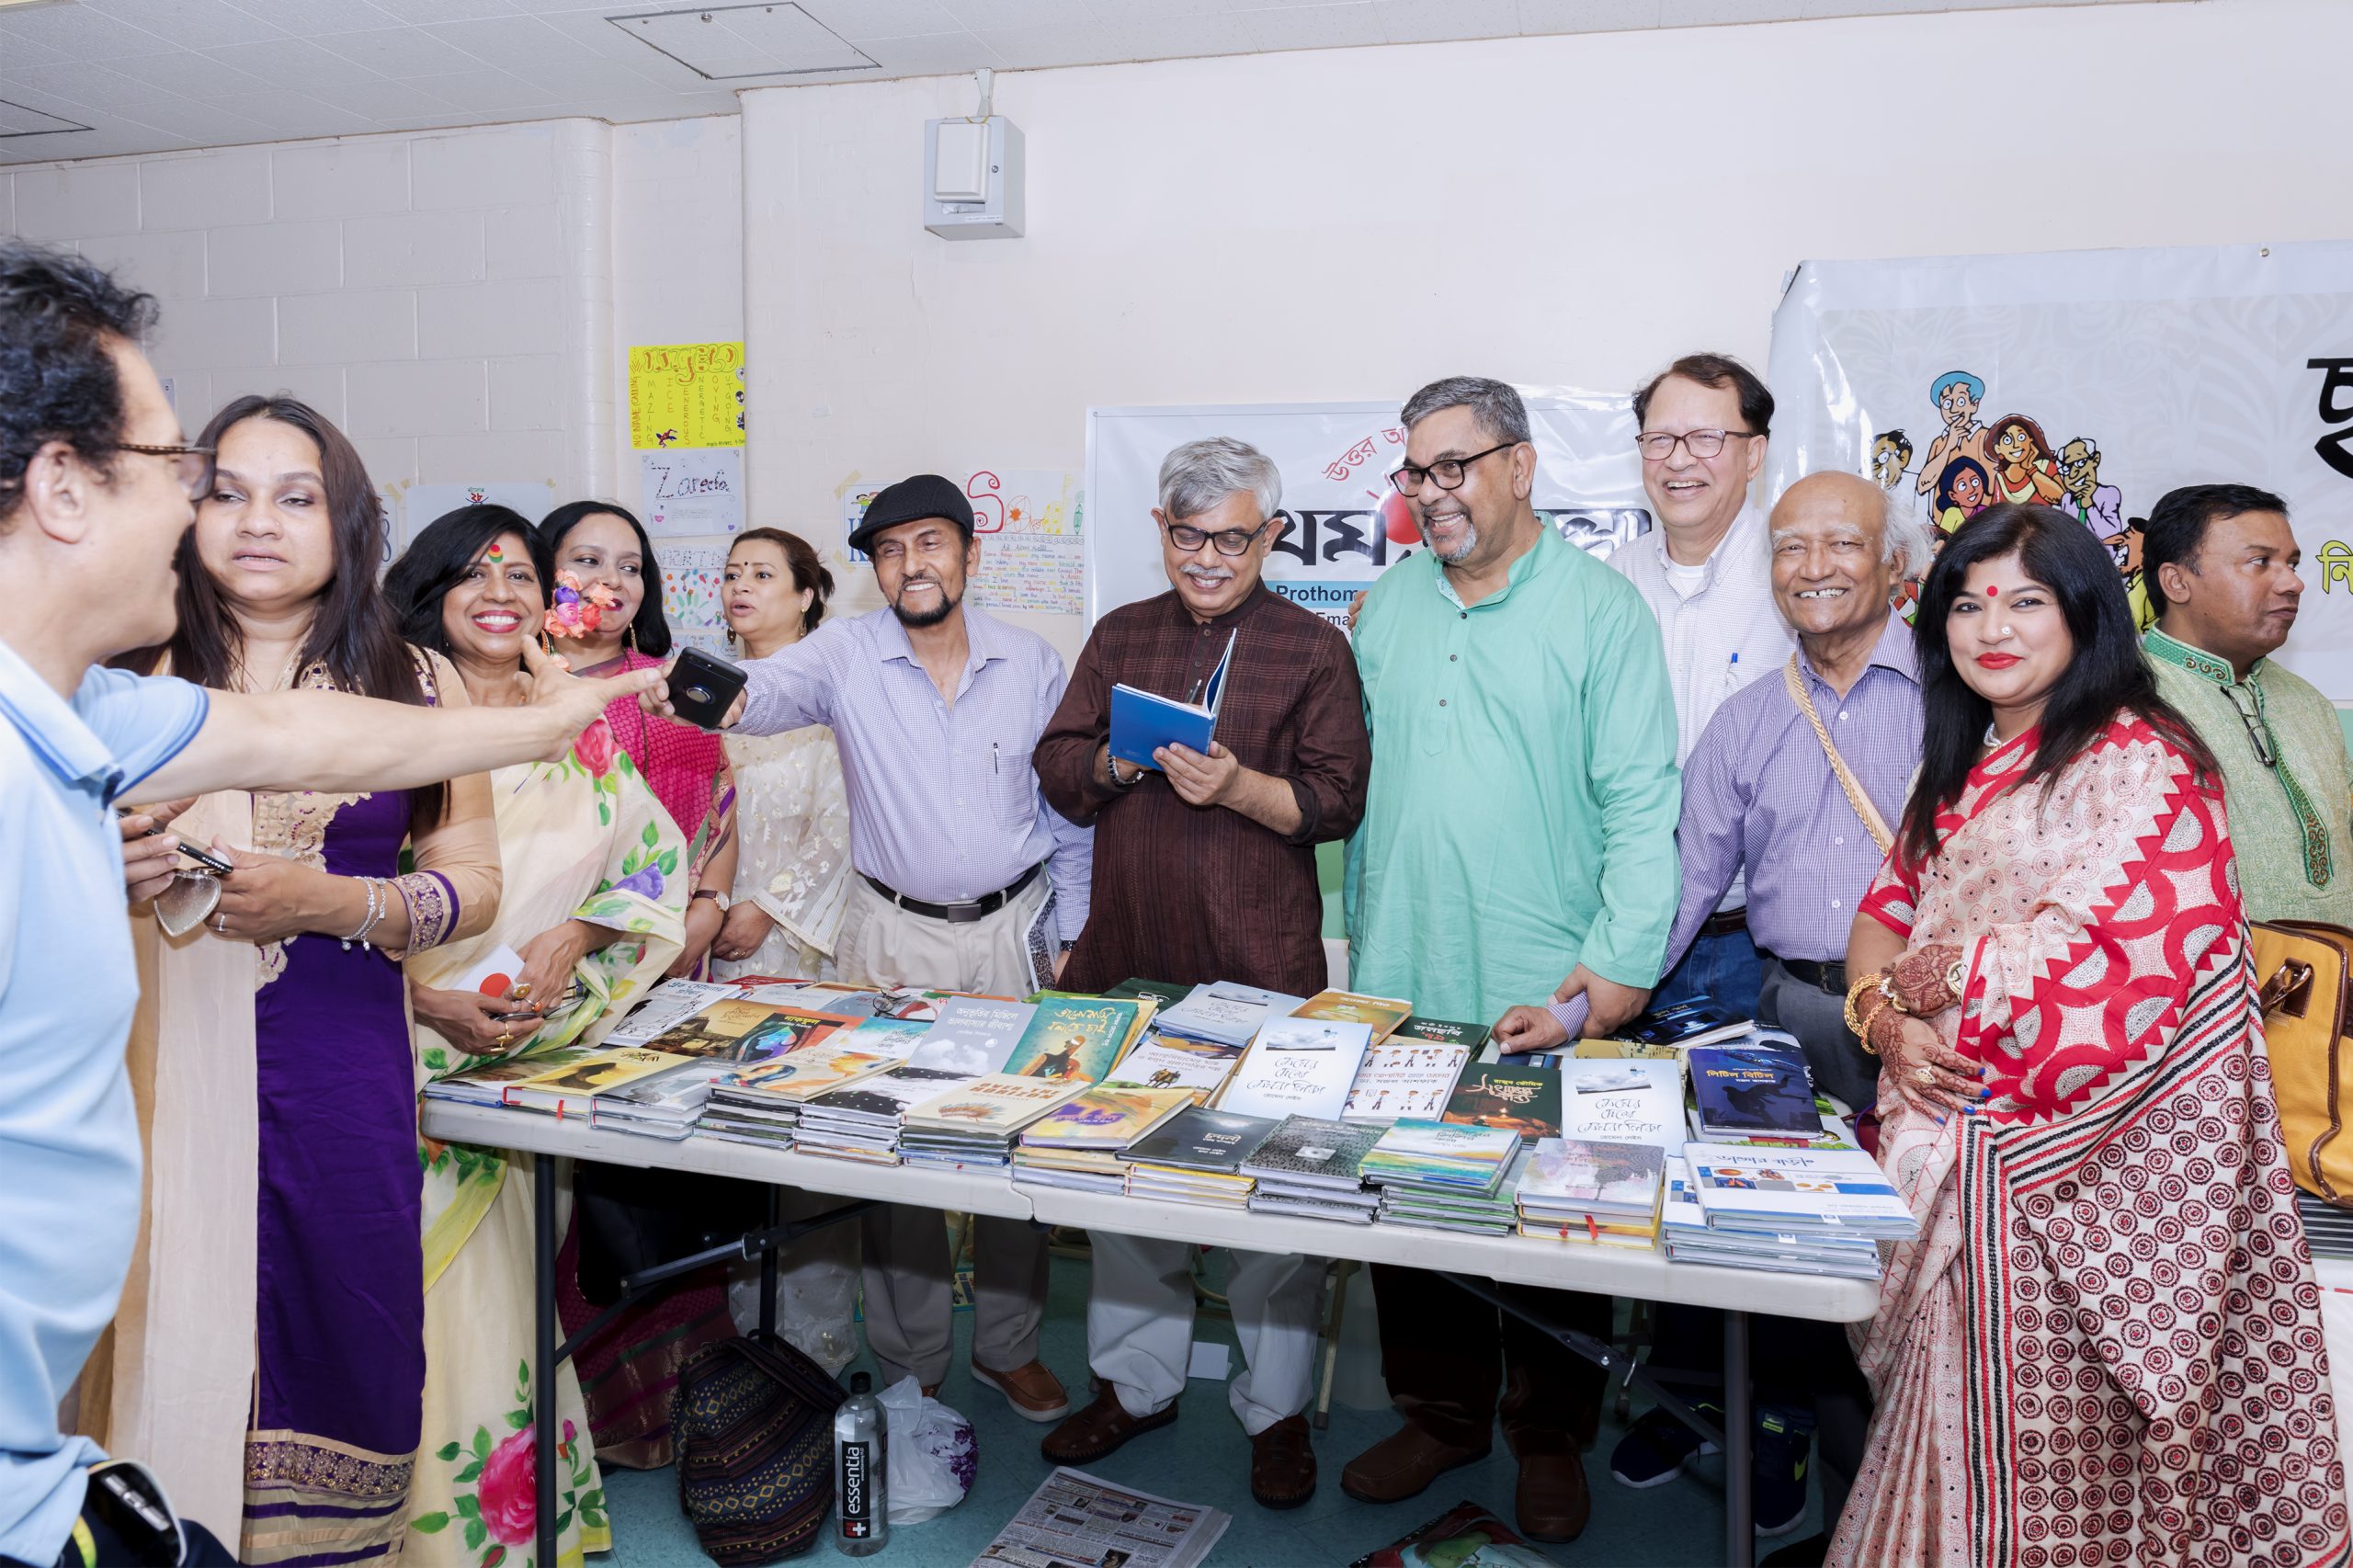 Writer Anisul Hoque among others at Prothom Alo North America Book Stall during the New York Bangla Boimela 2019